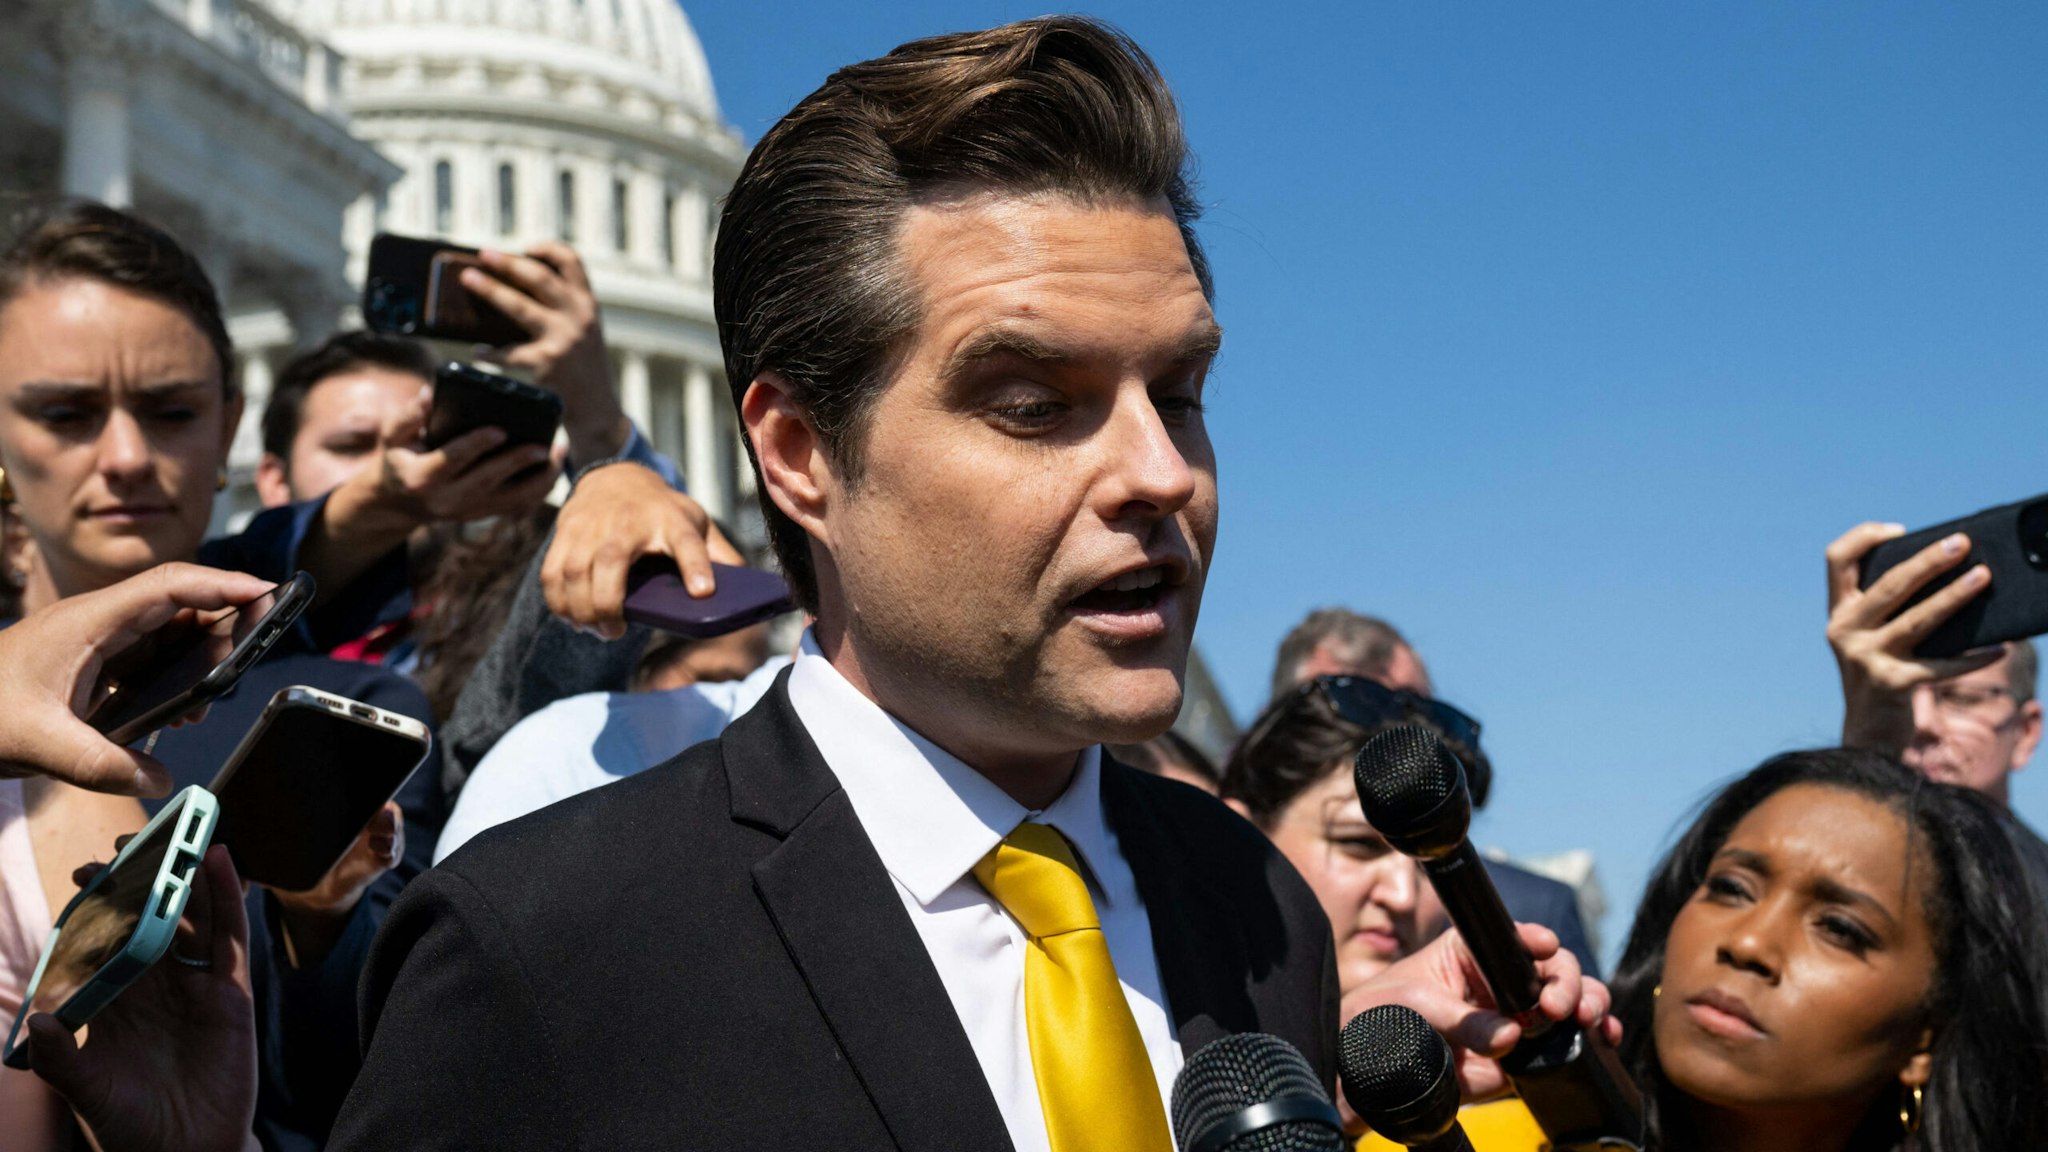 US Representative Matt Gaetz (R-FL) speaks to members of the media after speaking on the House floor about a possible Motion to Vacate to oust US Speaker of the House Kevin McCarthy, outside the US Capitol in Washington, DC, on October 2, 2023. A leading hardline Republican said on October 1, 2023, he would move to oust House Speaker Kevin McCarthy for striking a deal with Democrats to avert a US government shutdown without the spending cuts demanded by the right-wing caucus. US Representative Matt Gaetz (R-FL) is a leading figure within a small group of hardline Republican legislators who had brought the government to the brink of shutdown with their refusal to adopt fresh federal funding without deep spending cuts.